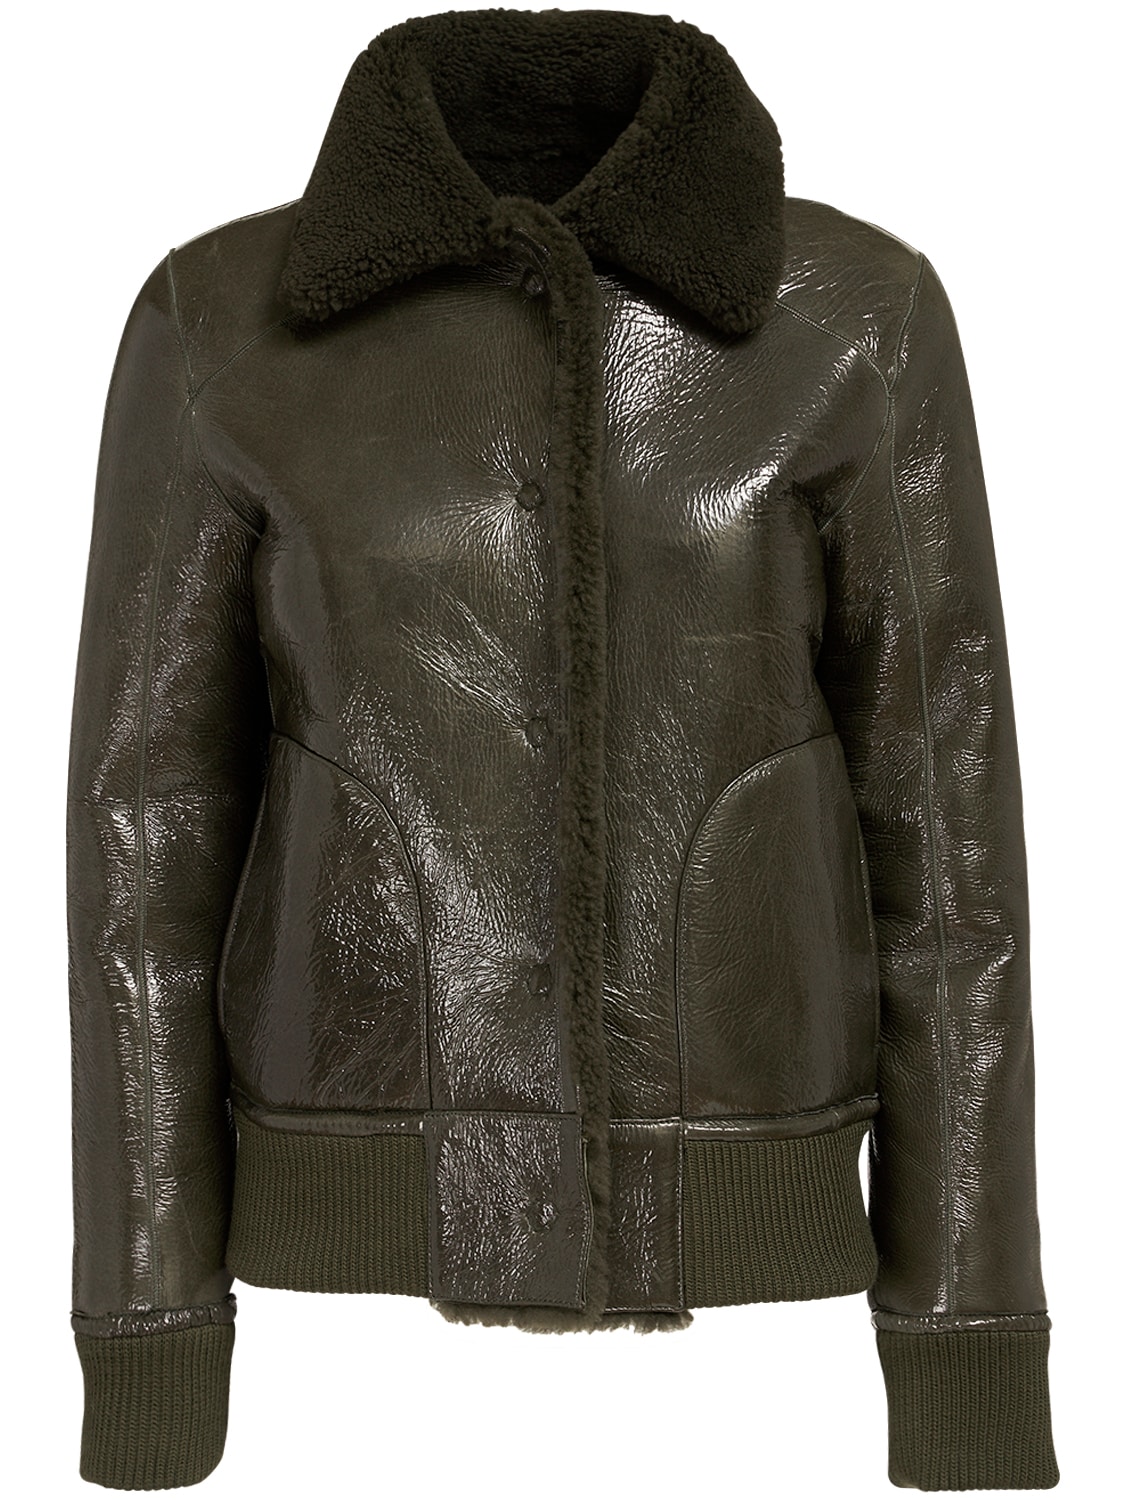 Remain Perla Shearling & Leather Crop Jacket In Green | ModeSens